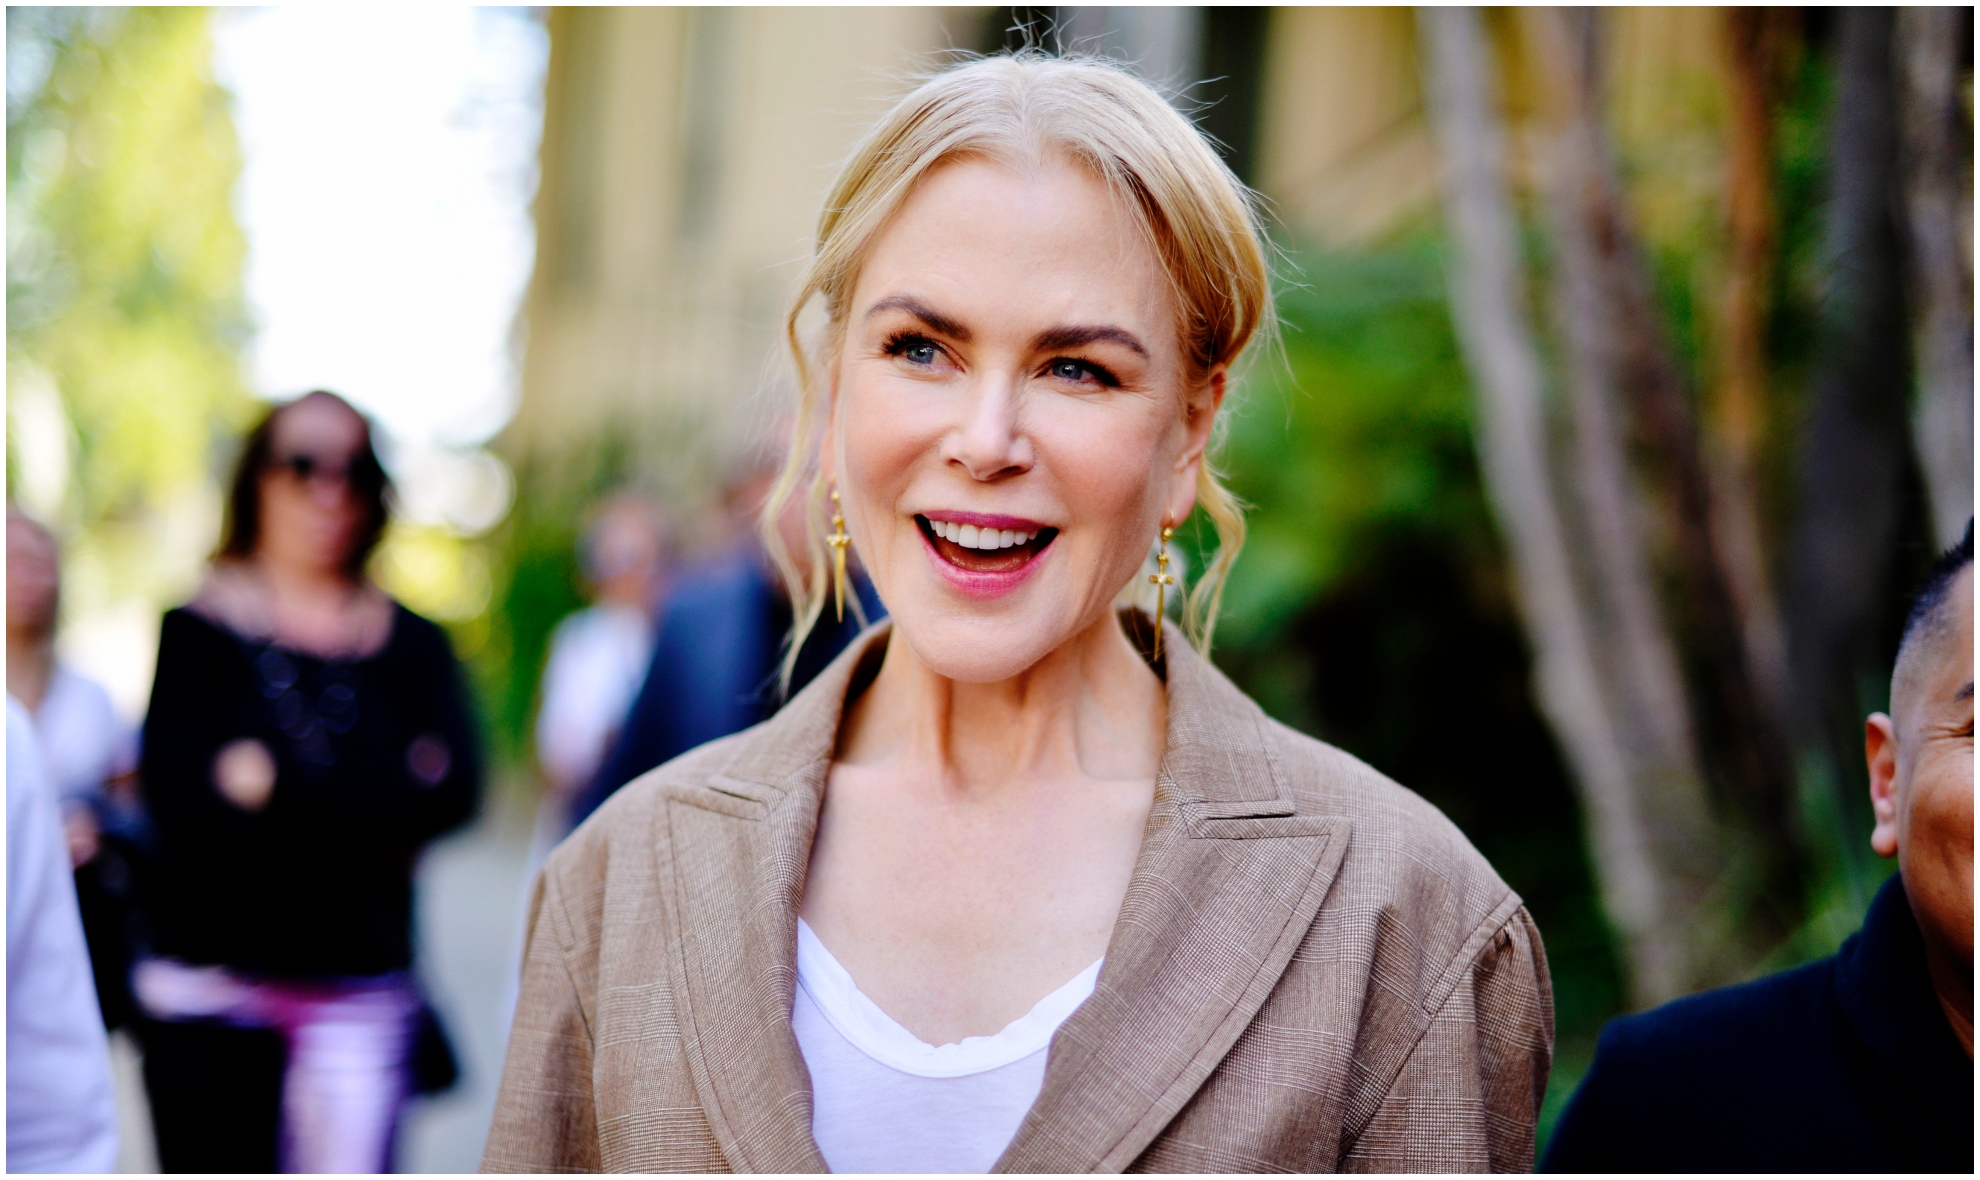 Nicole Kidman’s very unexpected hair “transformation” from her hit series The Undoing leaves her fans in stitches